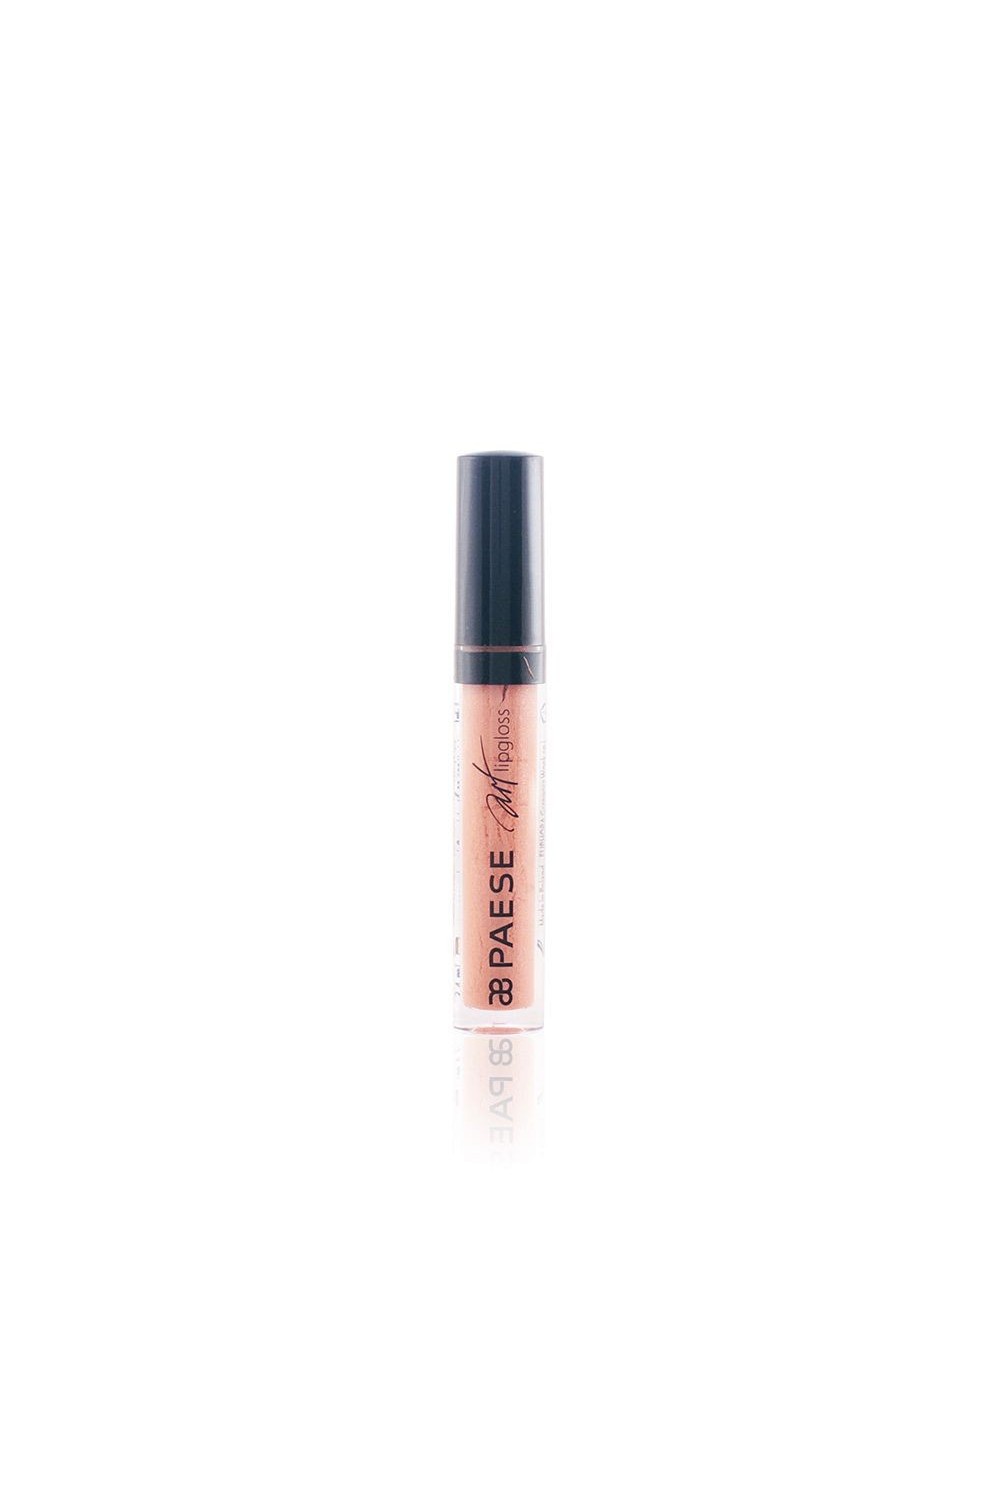 PAESE COSMETICS - Paese Art Shimmering Lipgloss 420